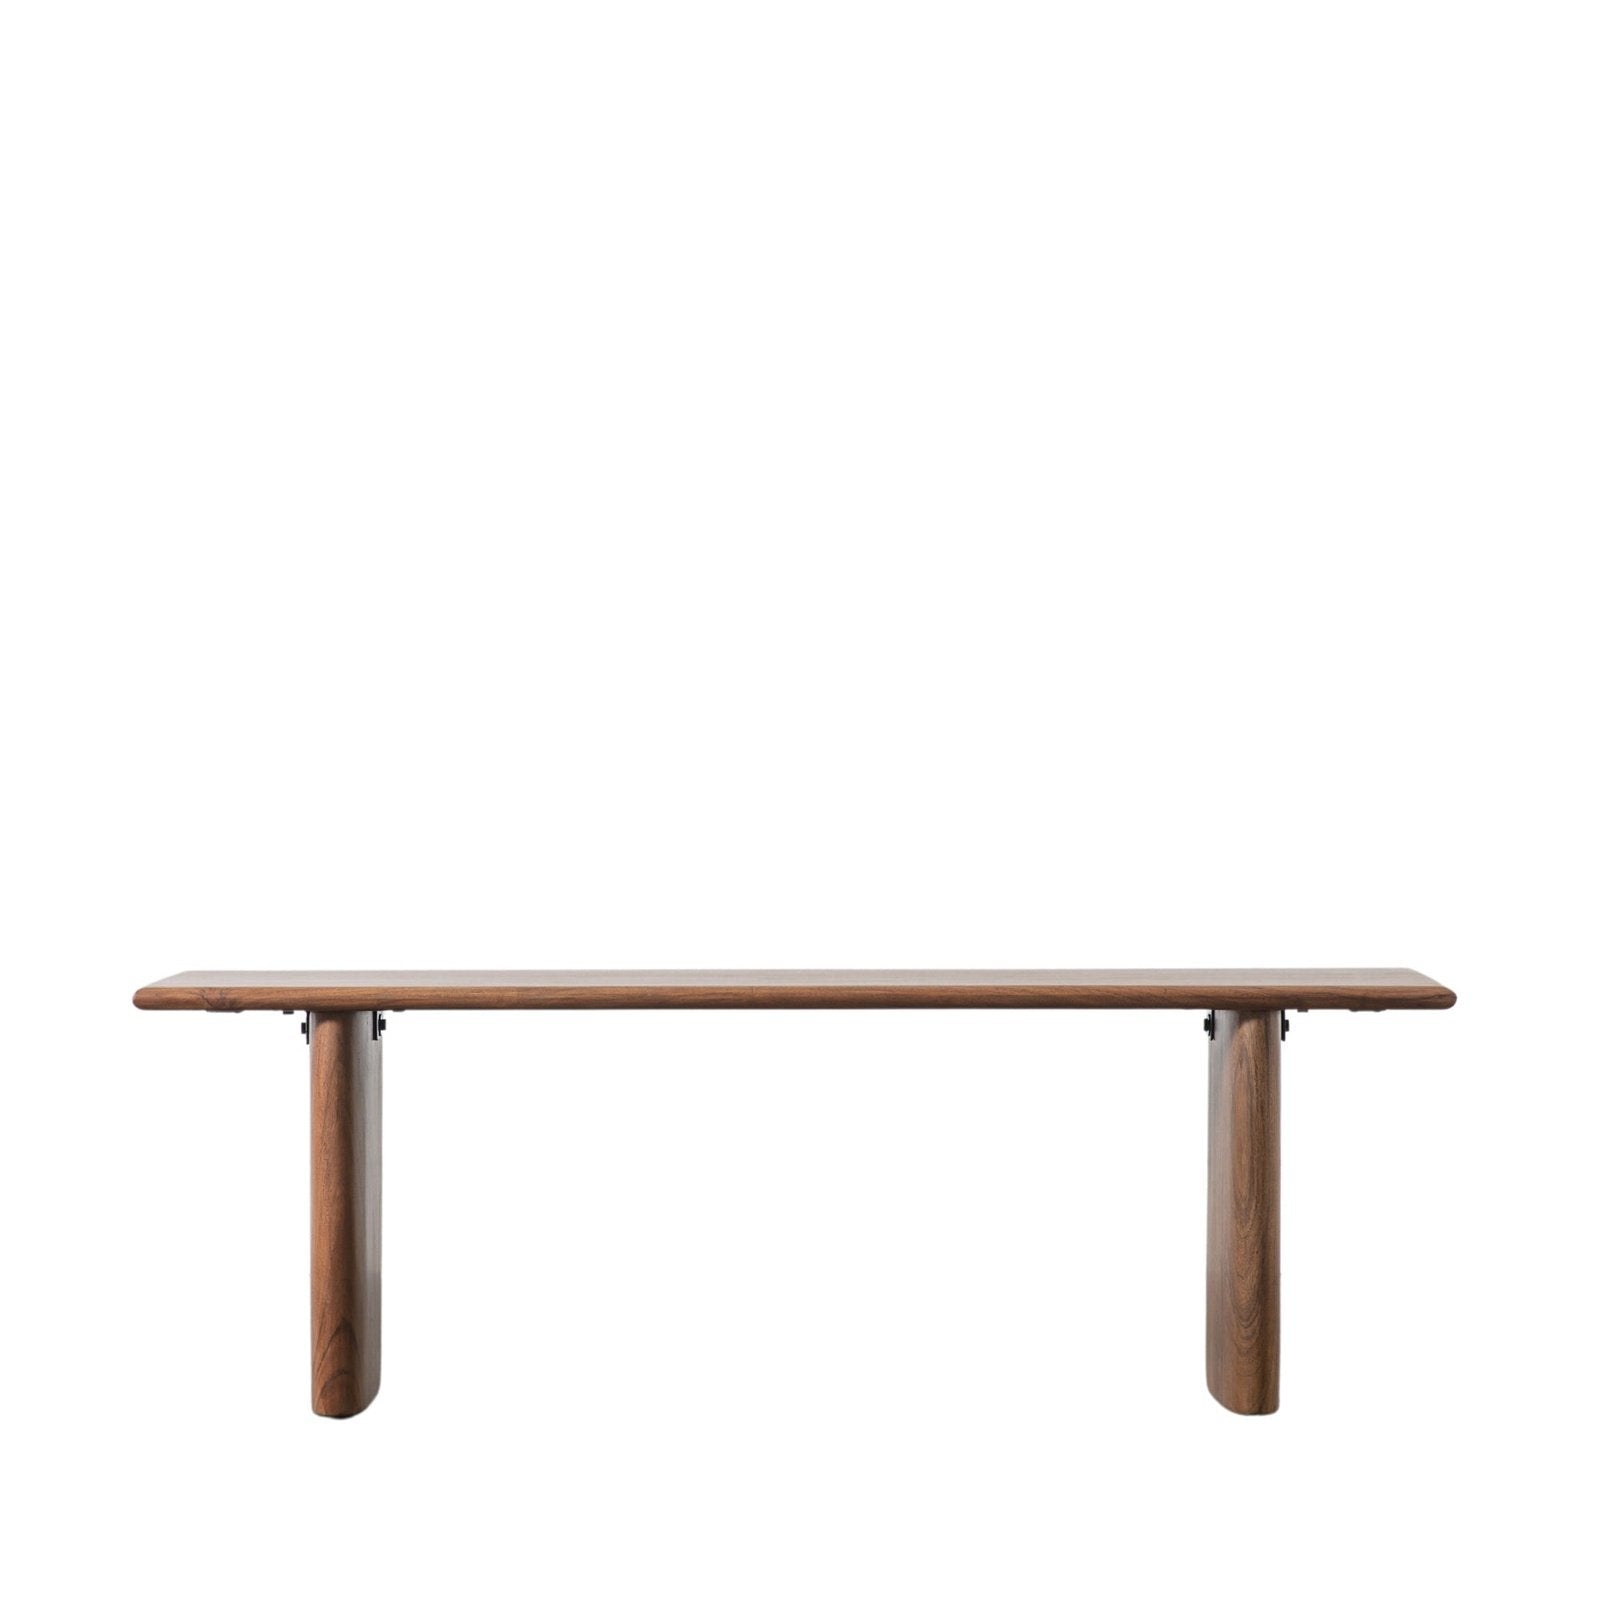 Cashmere Dining Bench - Solid Acacia Wood & Iron - Warm Natural Finish - Modern Rustic Style